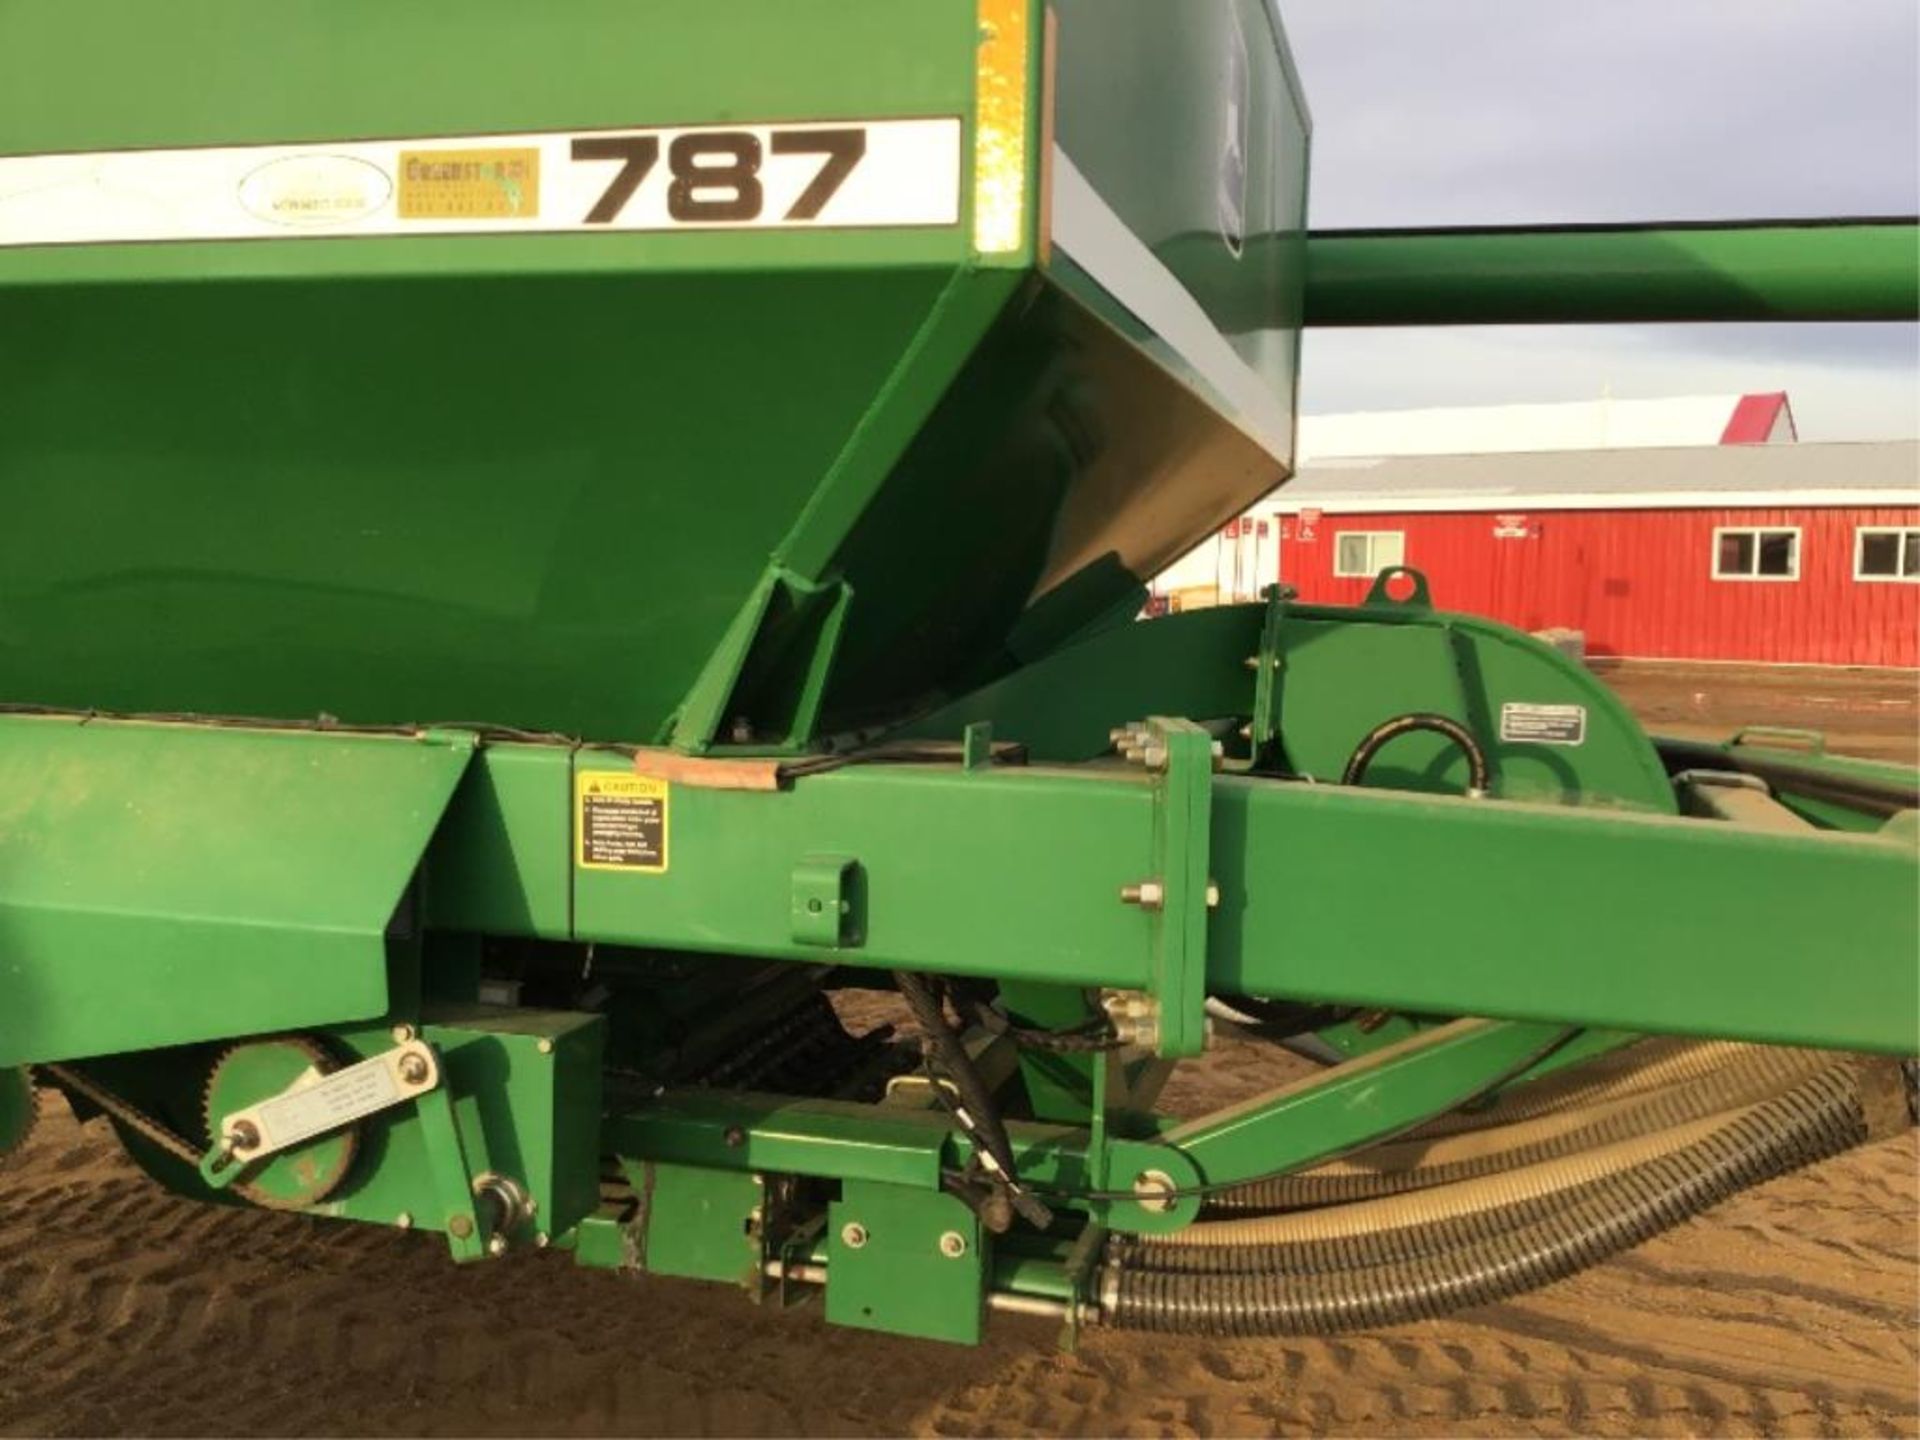 29 1997 John Deere 737 40Ft Air Drill & 787 2-Comp Tow-Behind Tank Floating Hitch, 7.5in Spacing, - Image 9 of 33